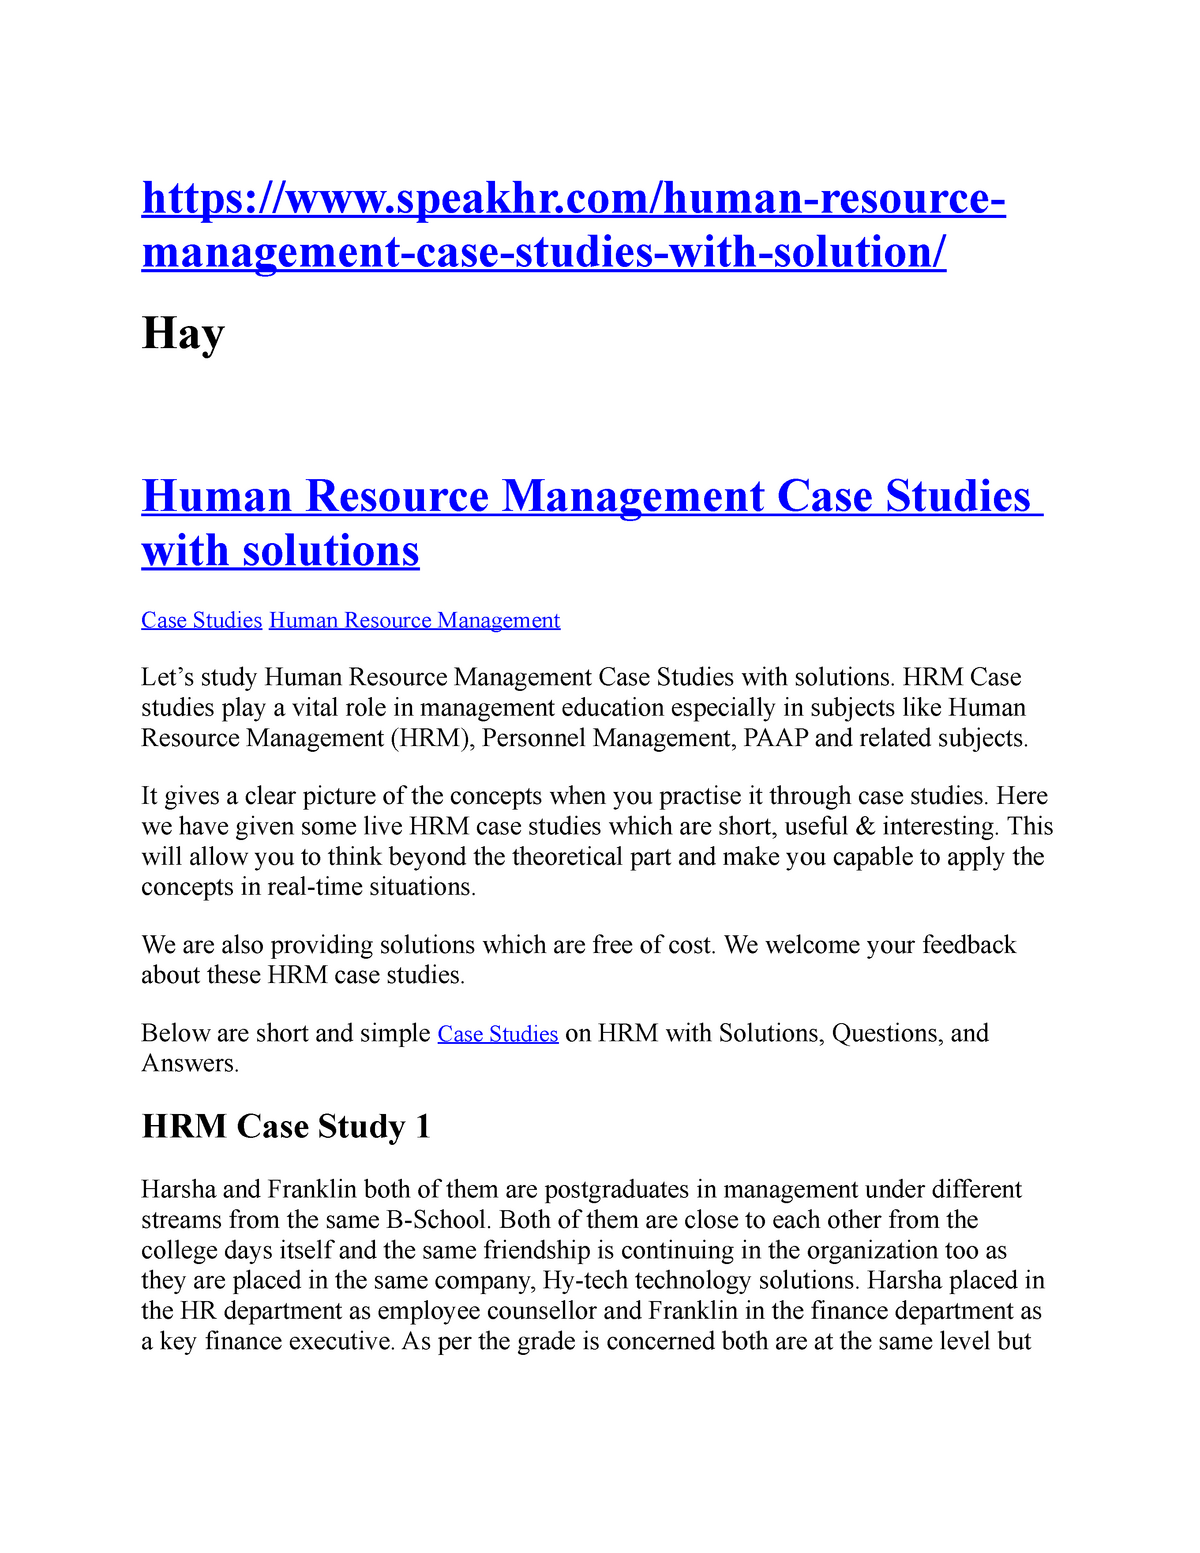 hrm case study with solution for mba